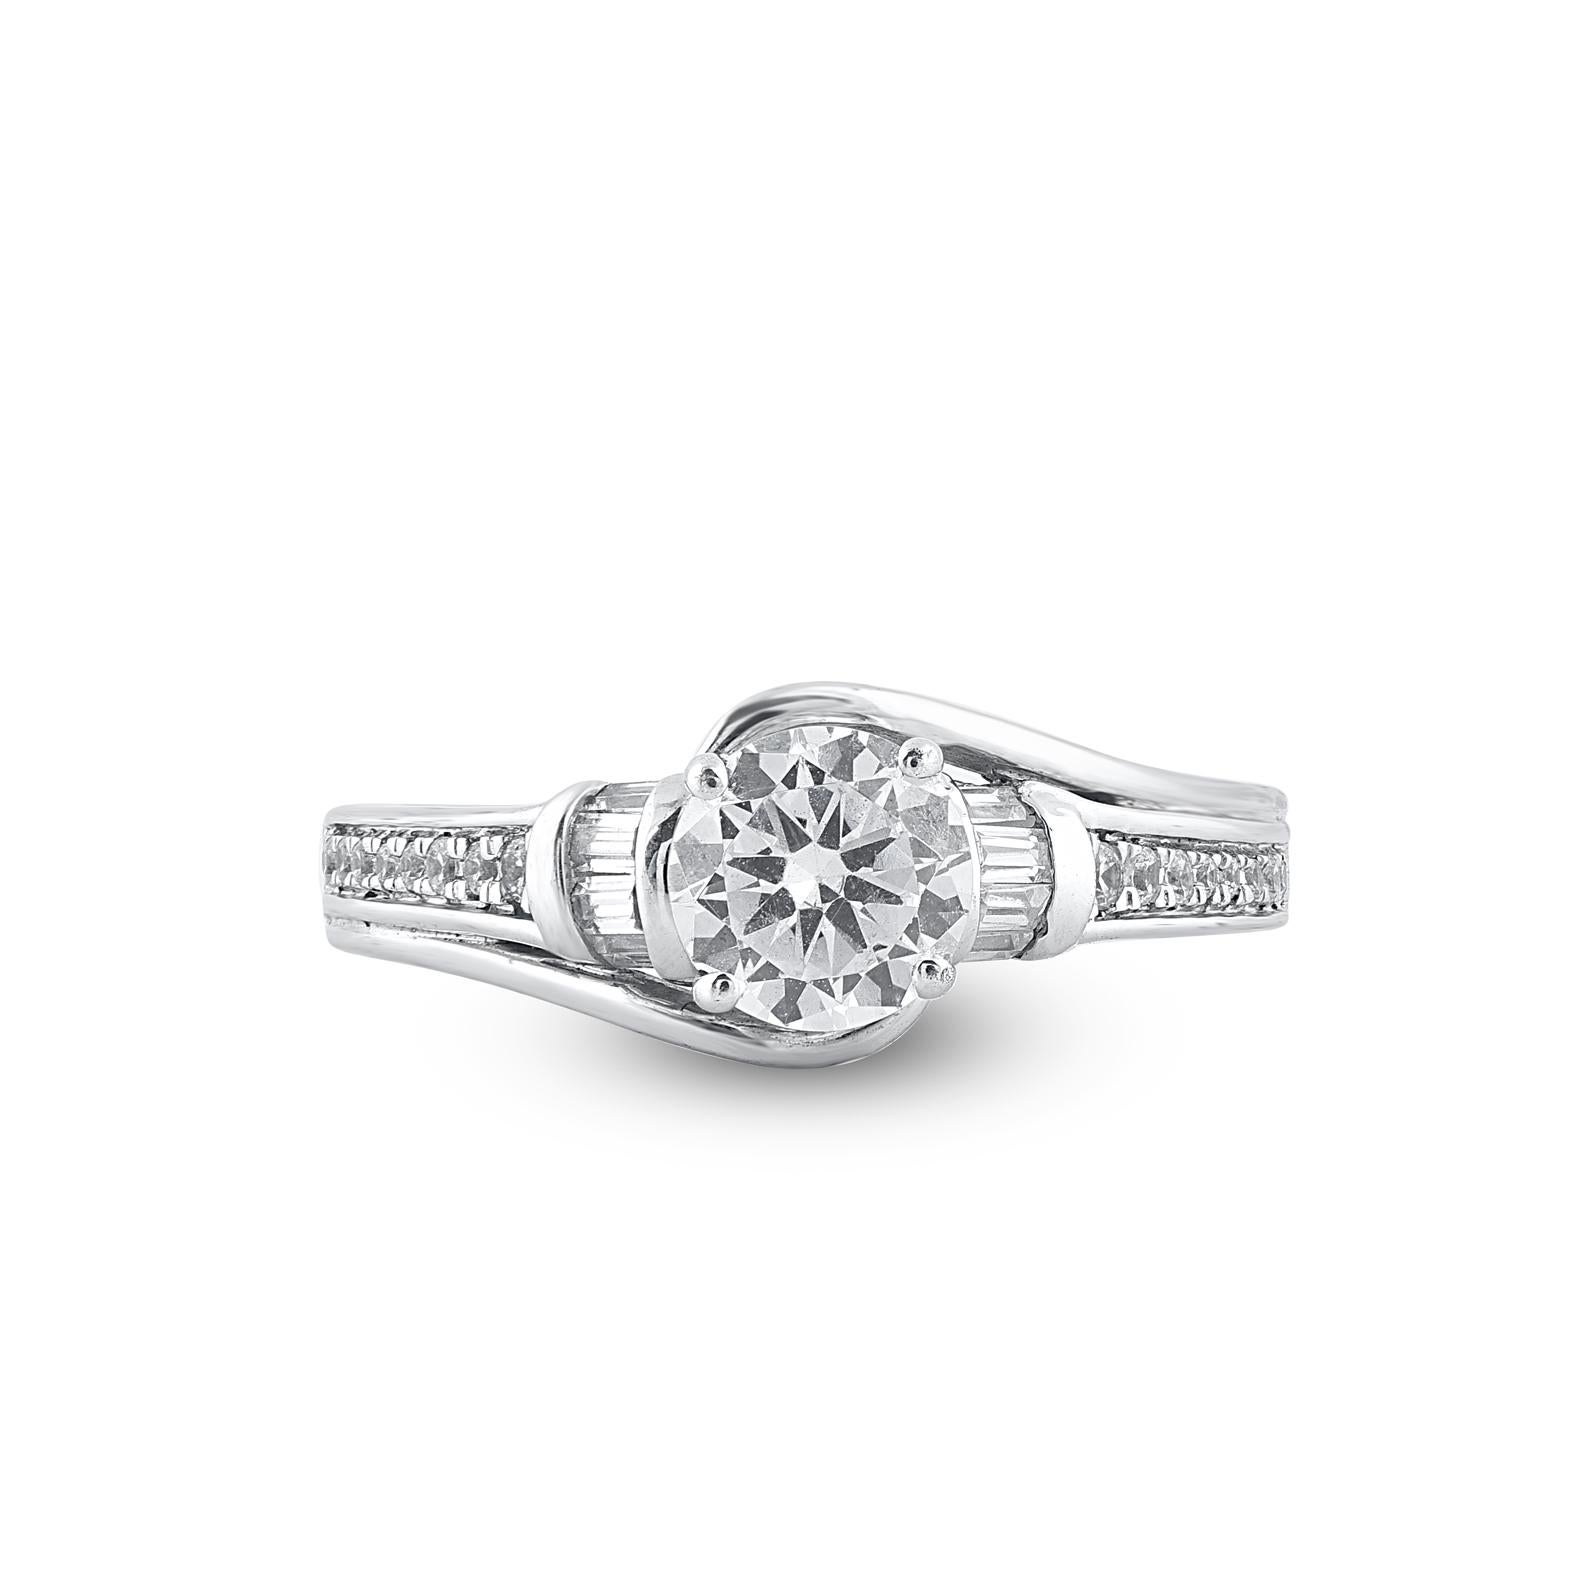 A modern makeover for a classic accessory, this diamond studded band glitters with 27 round diamonds in prong, pave and channel setting. This diamond band is crafted in 14 karat white gold. Diamonds are graded H-I color, I2 clarity. This ring has